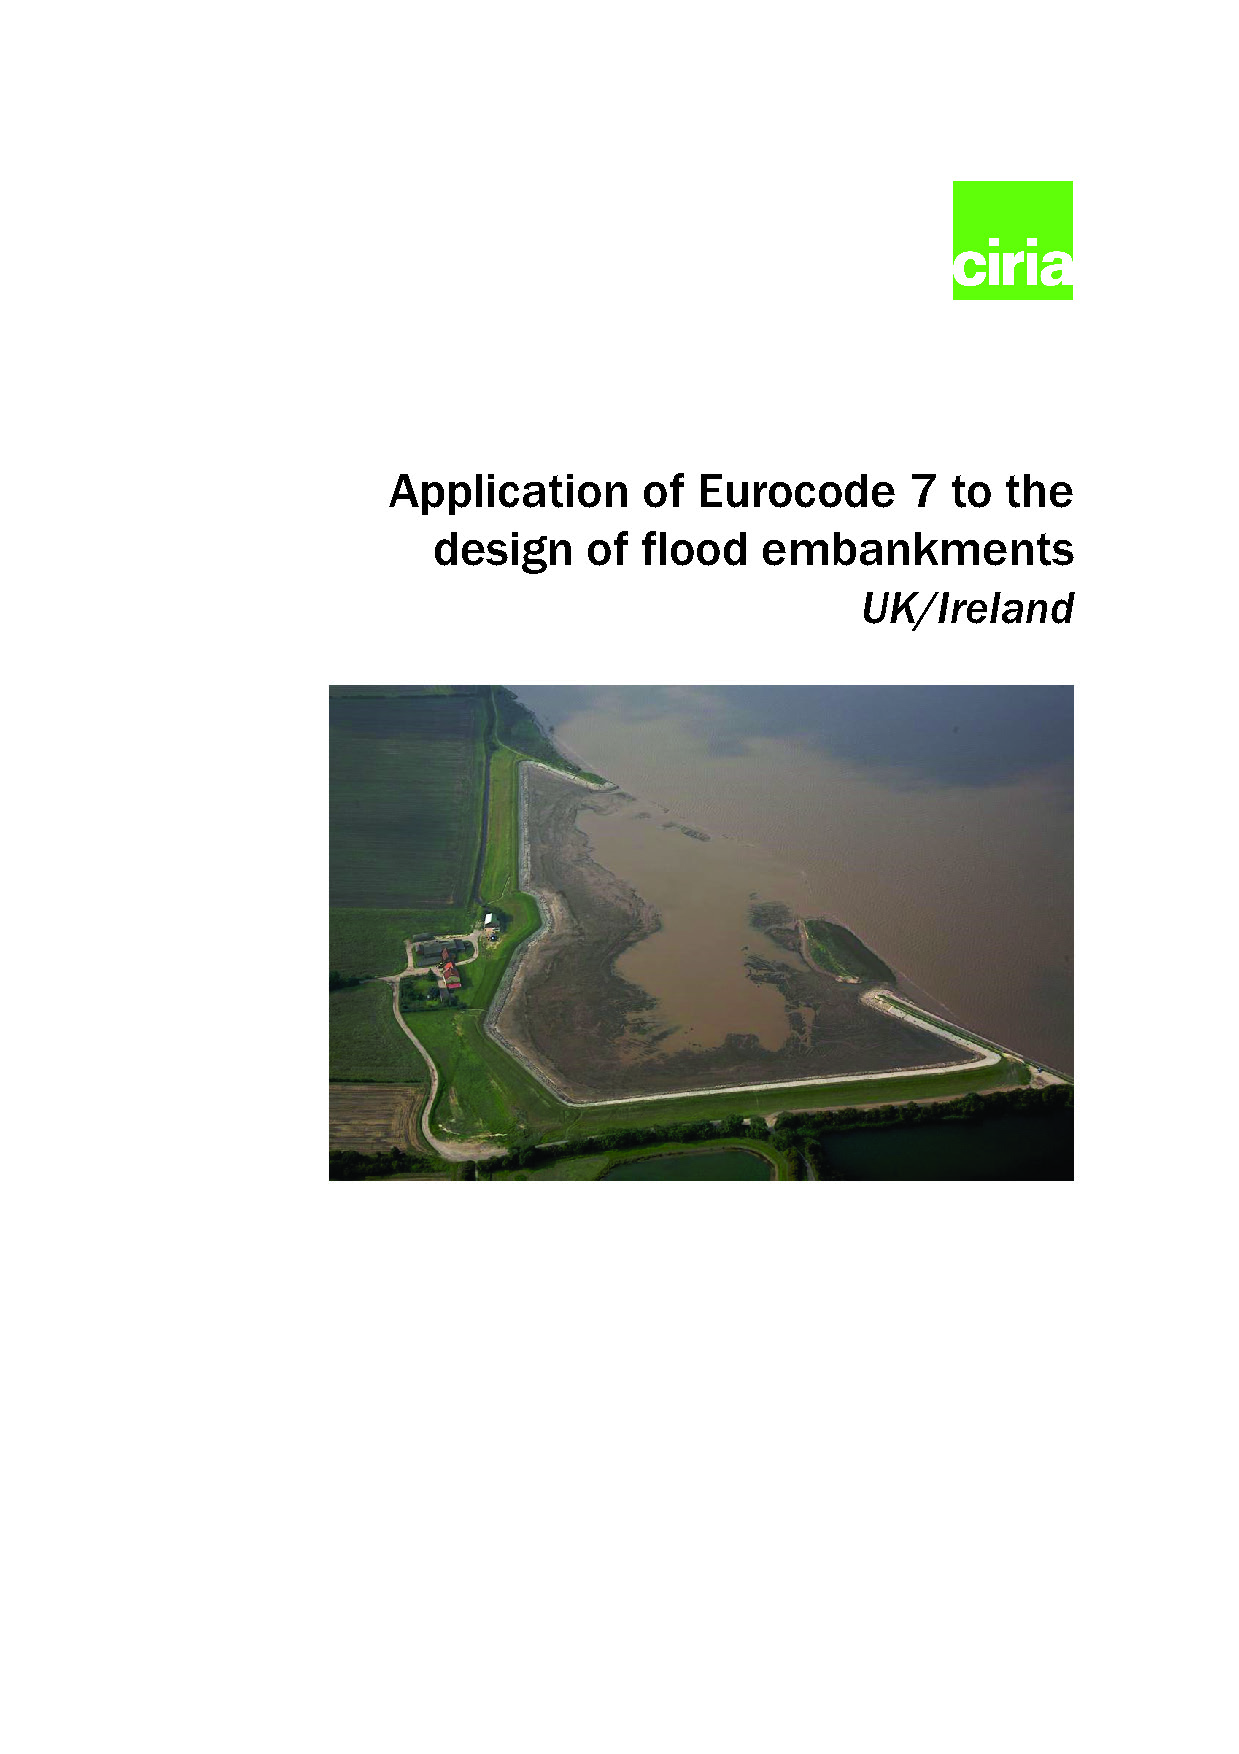 Application of Eurocode 7 to the design of flood embankments